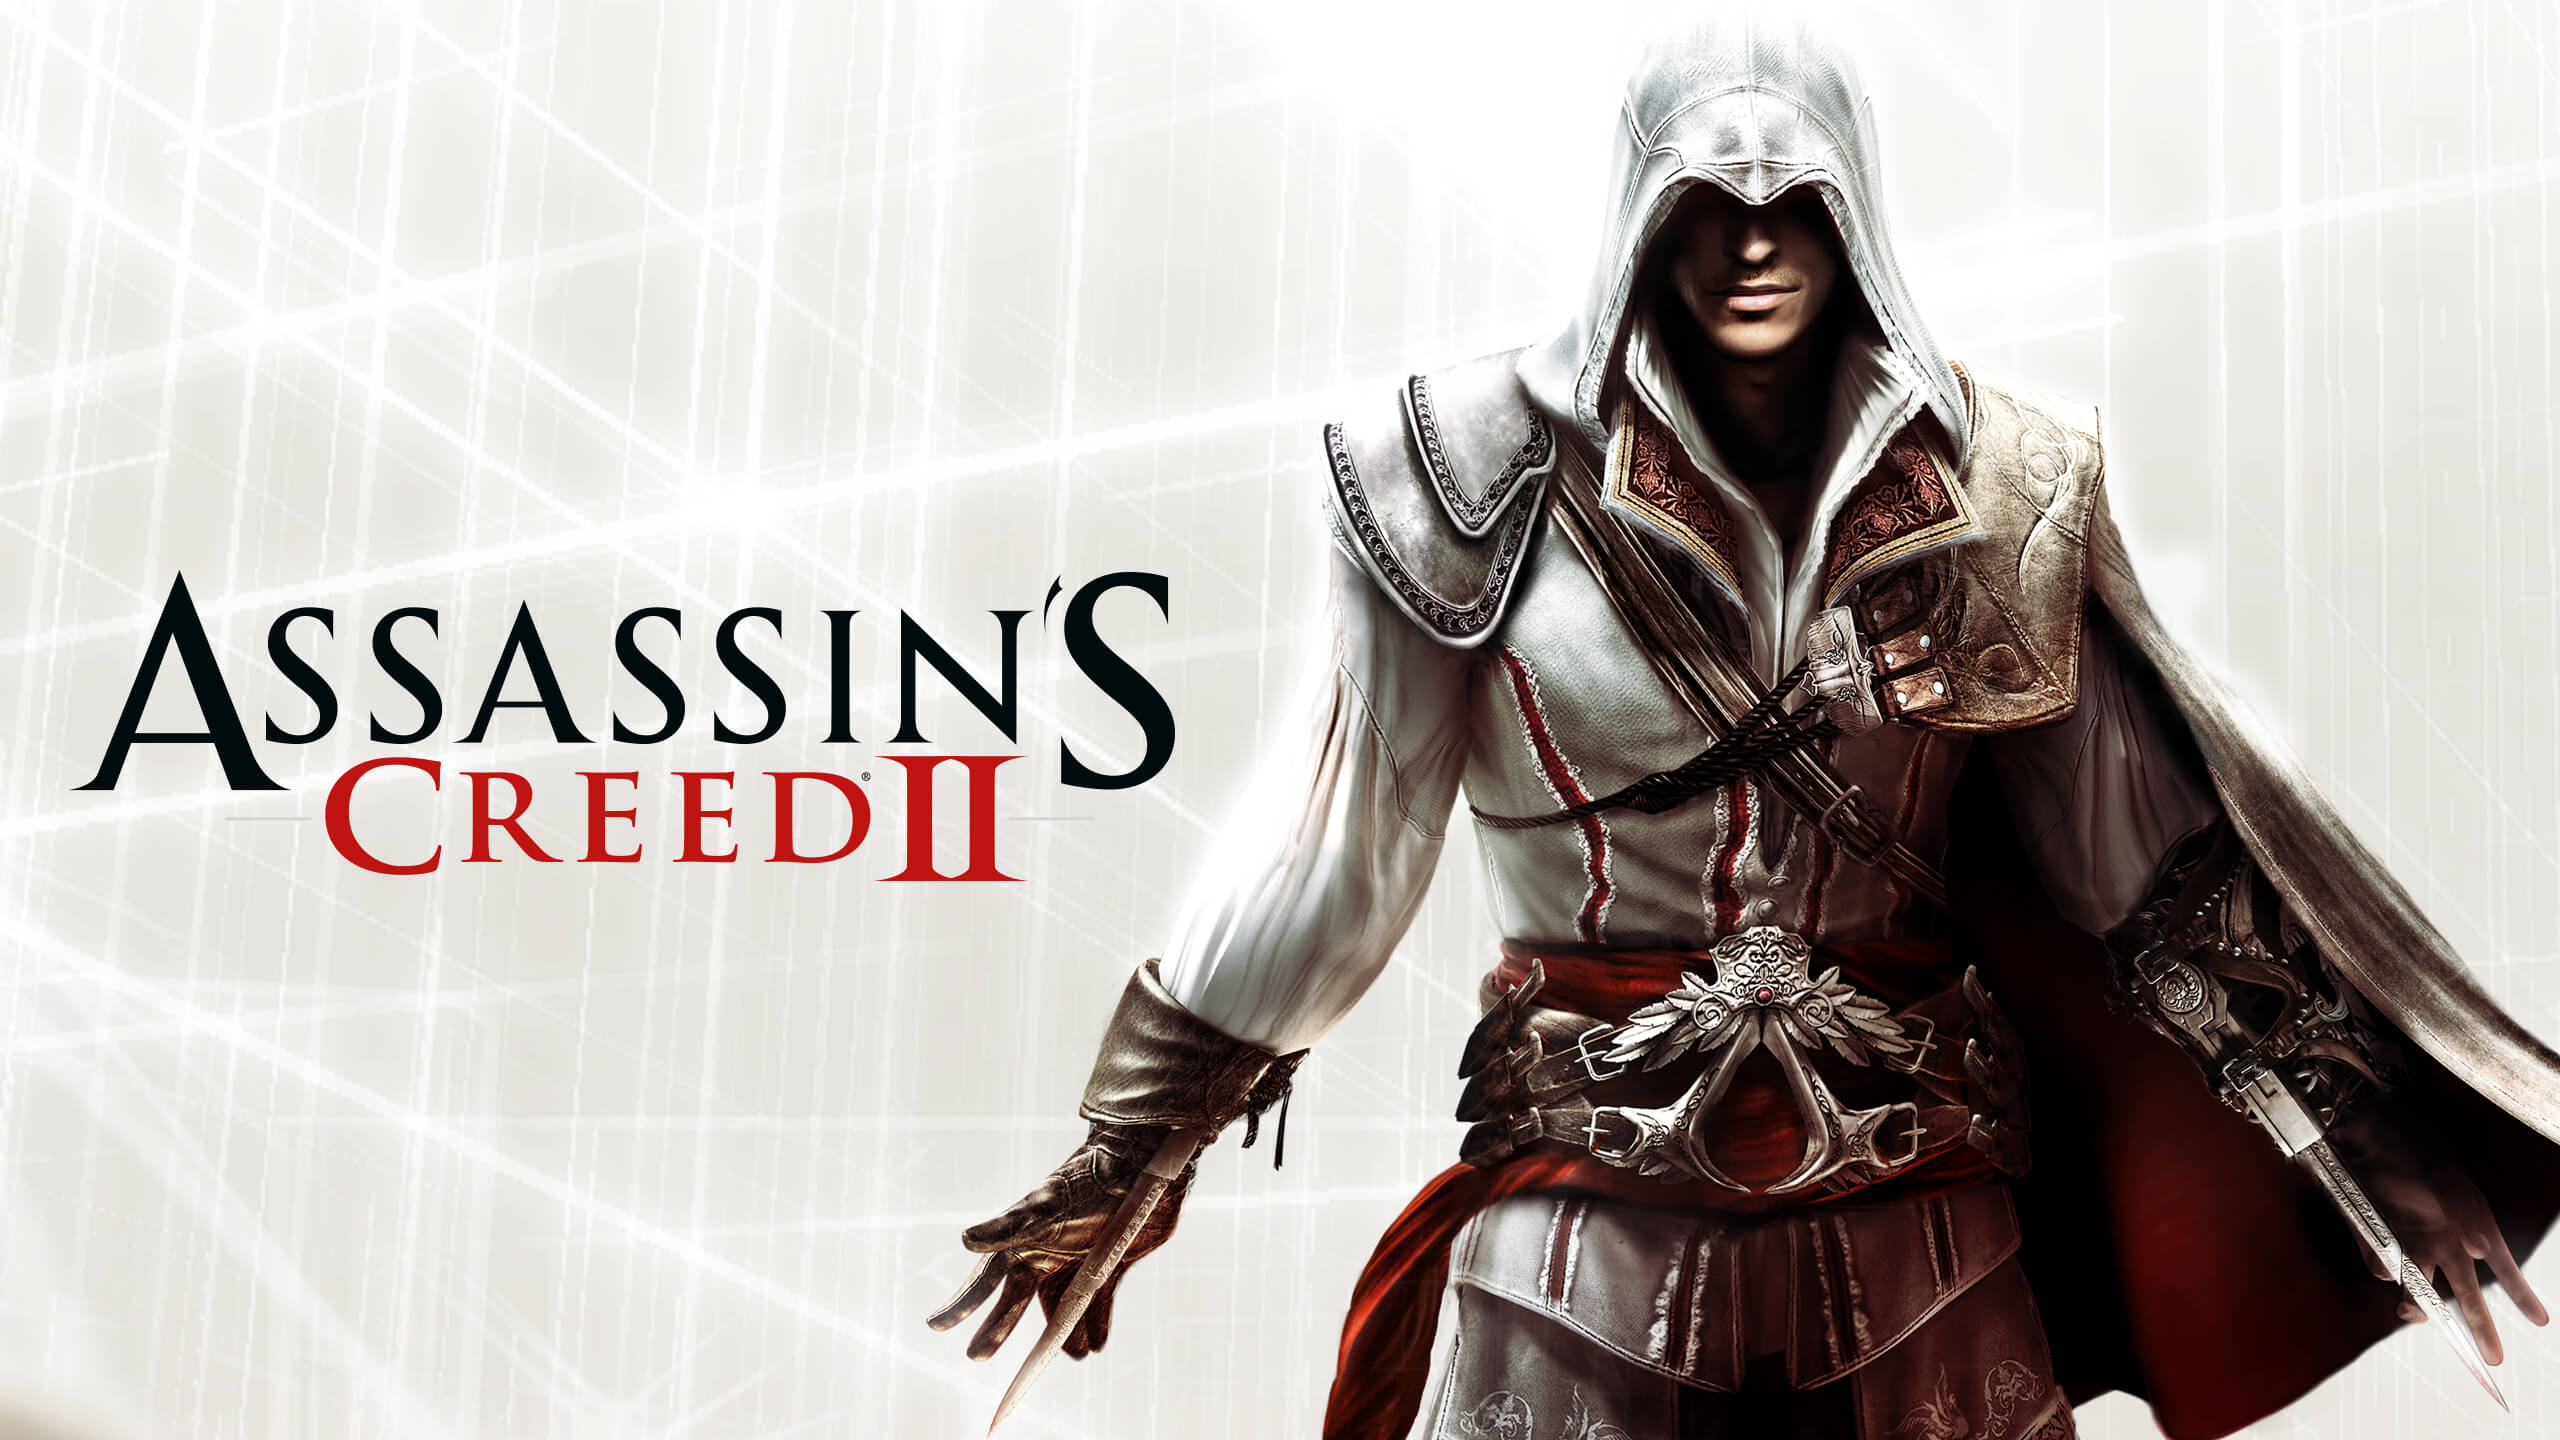 Assassin Creed 2 PC Download Free Full Game For windows